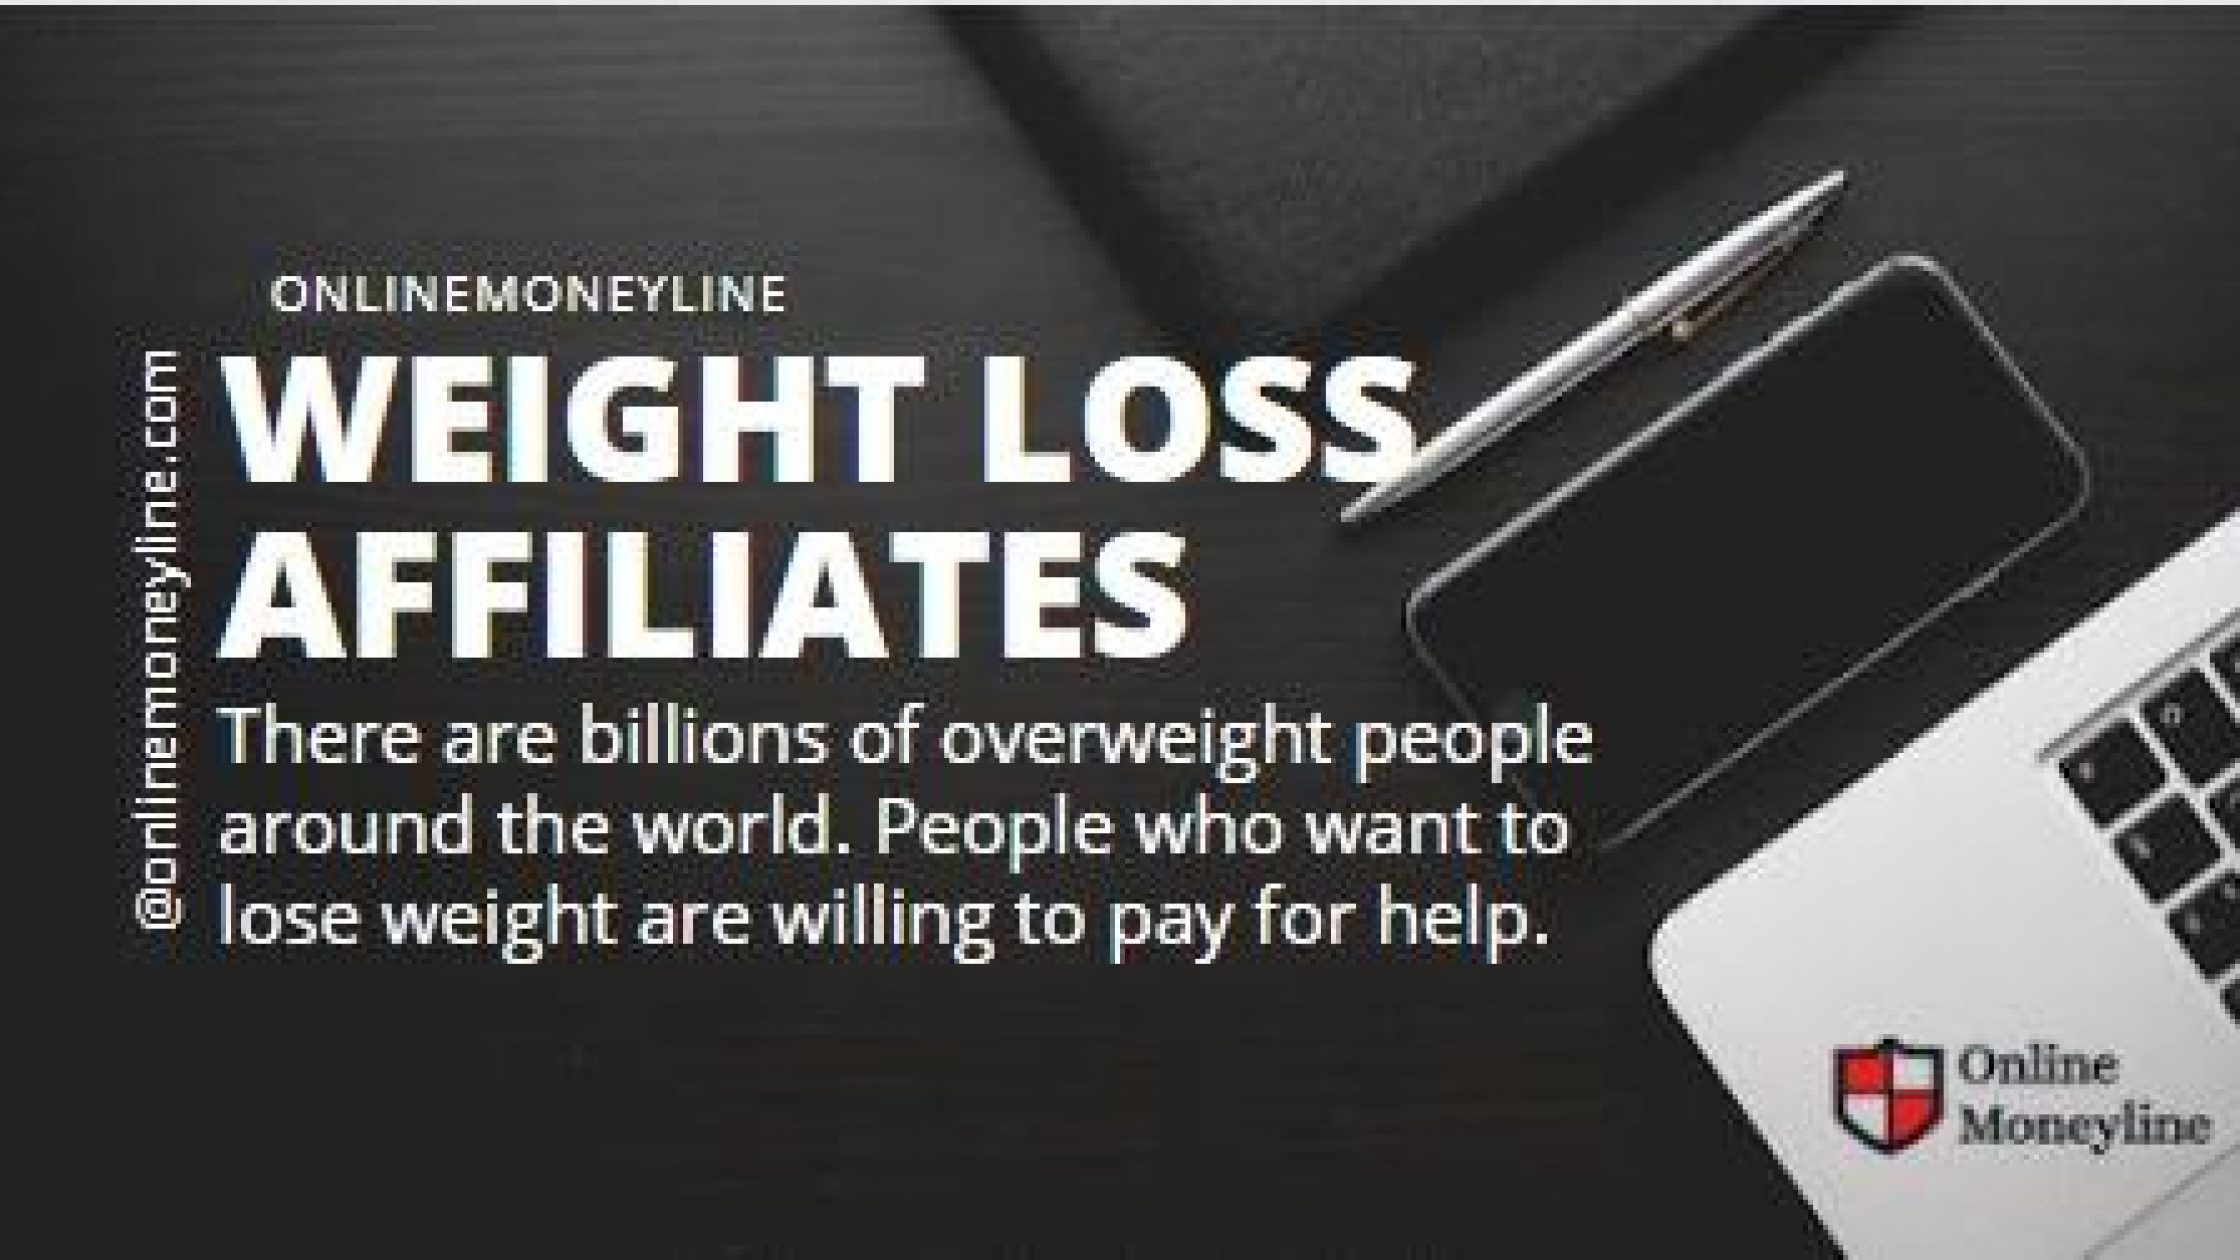 Weight Loss Affiliates